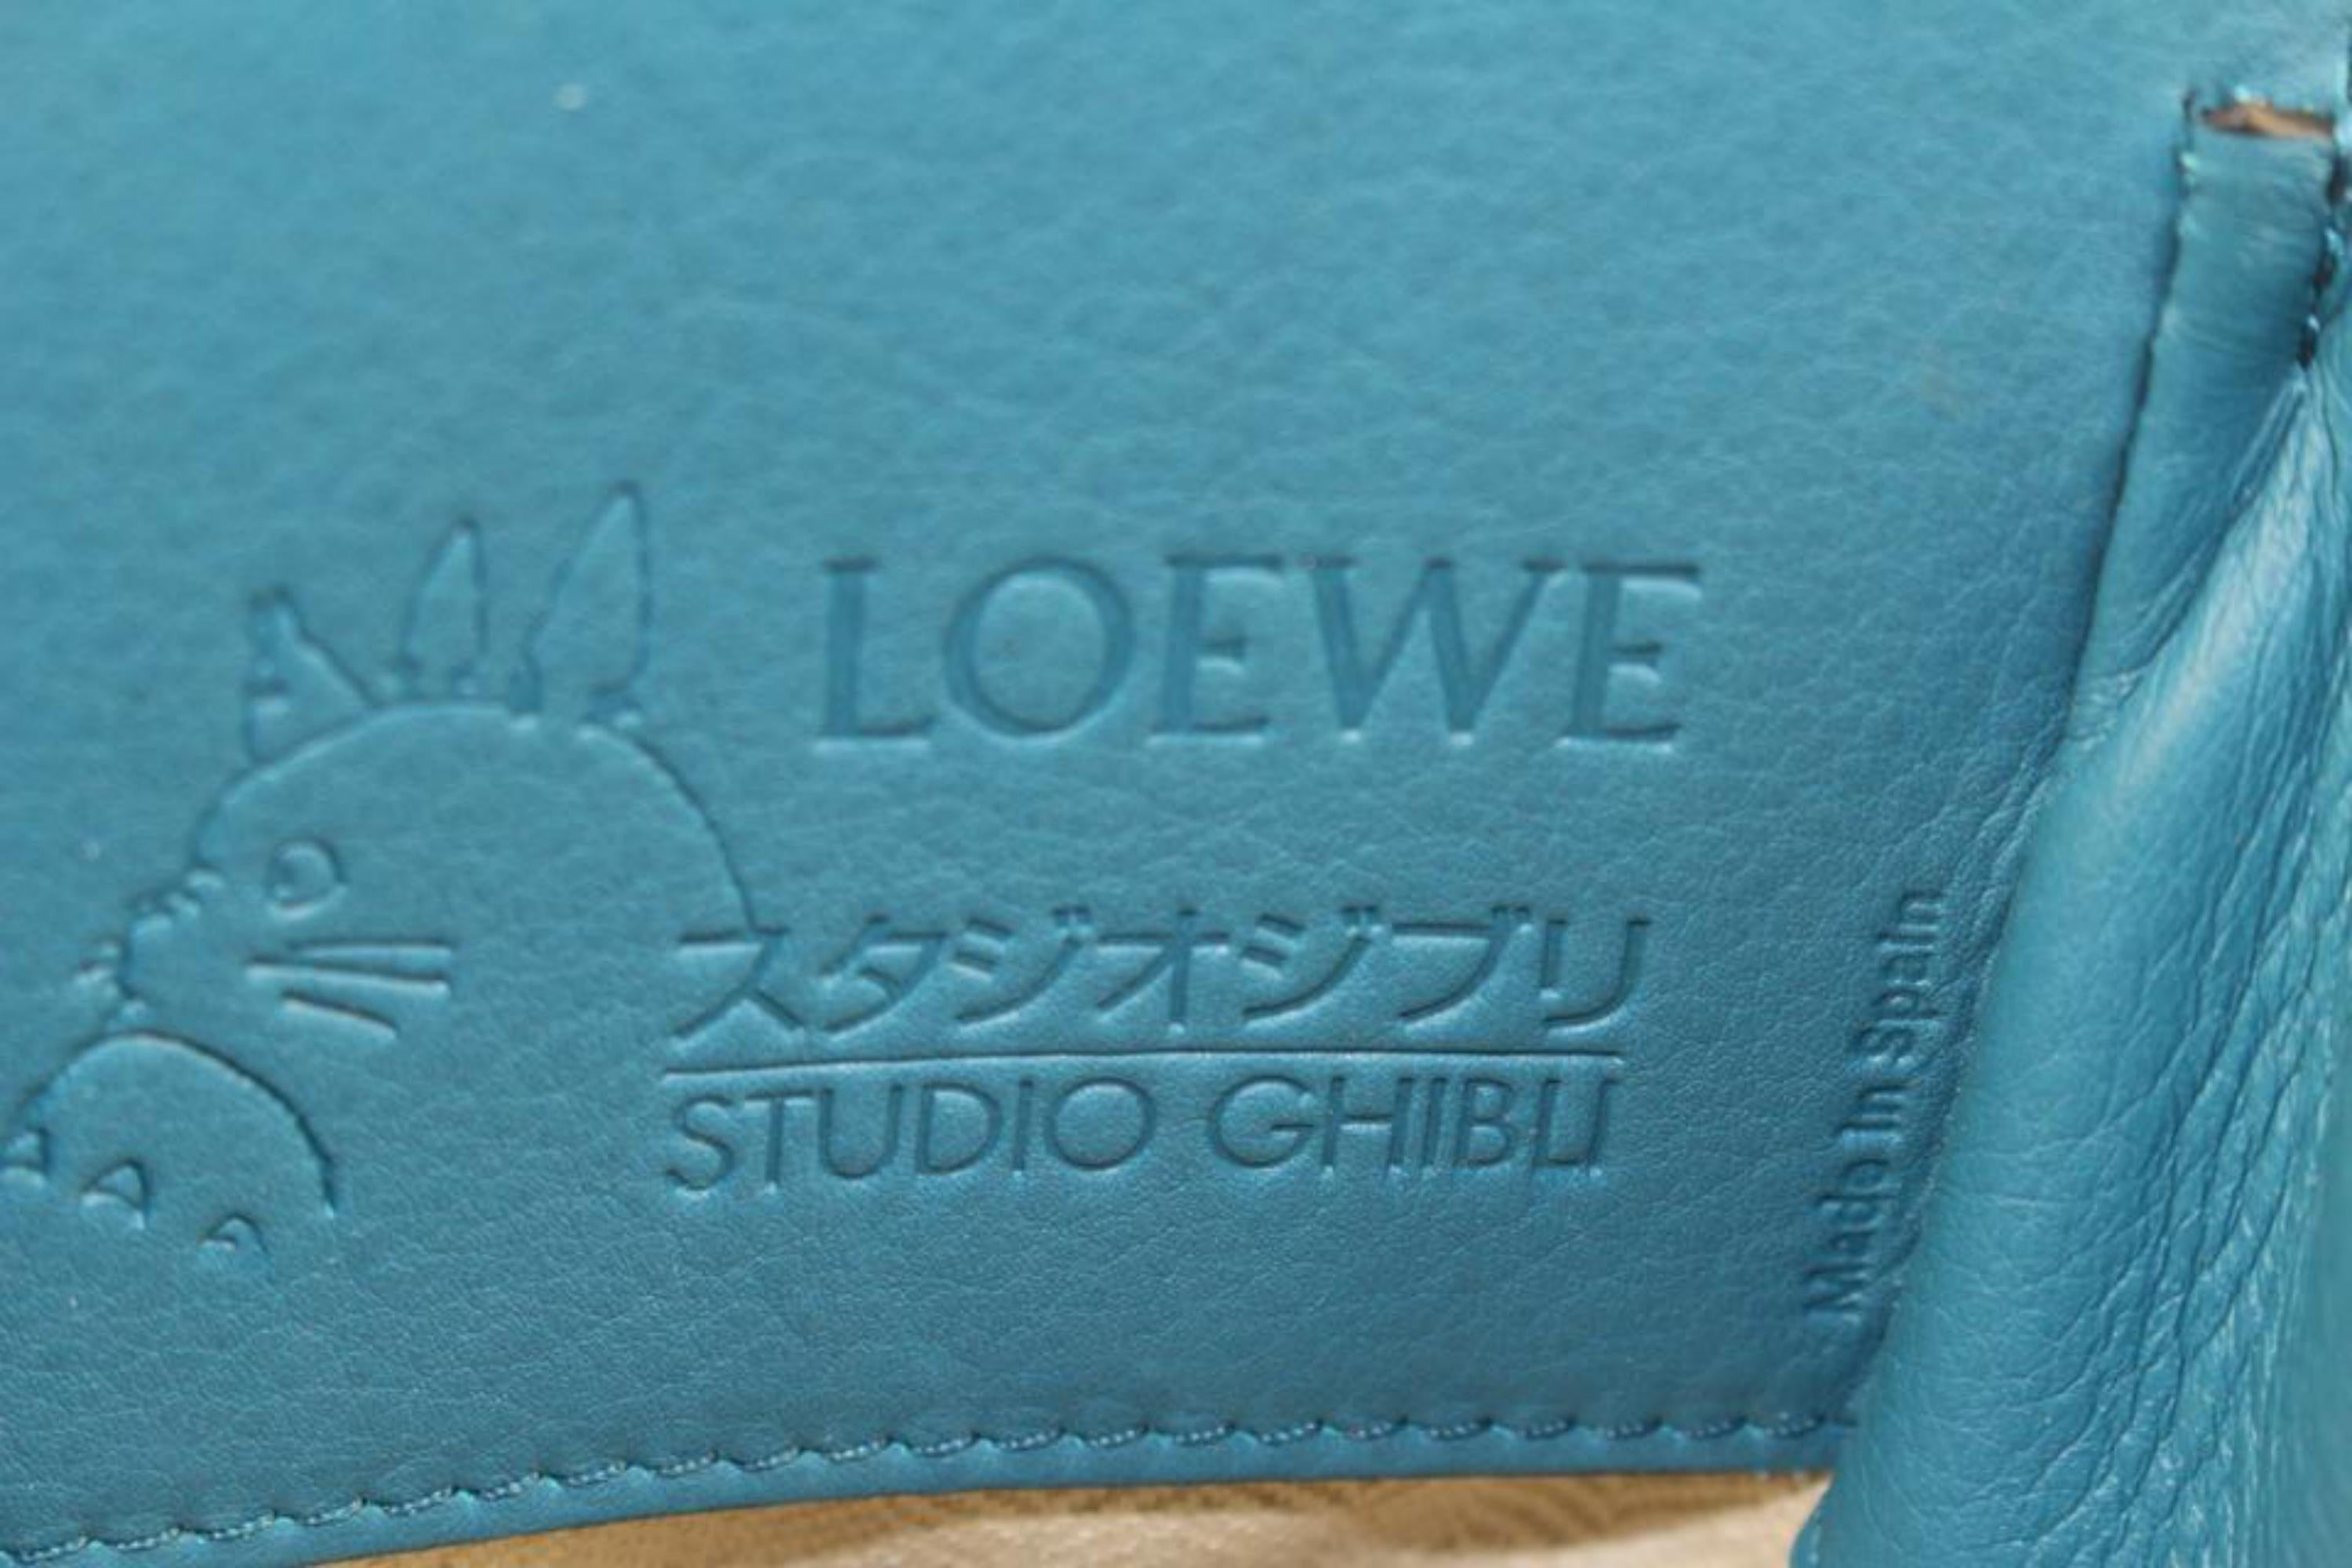 Loewe Studio Ghibli Spirited Away Bo mouse Mini Hammock Drawstring 59lo32s In New Condition For Sale In Dix hills, NY